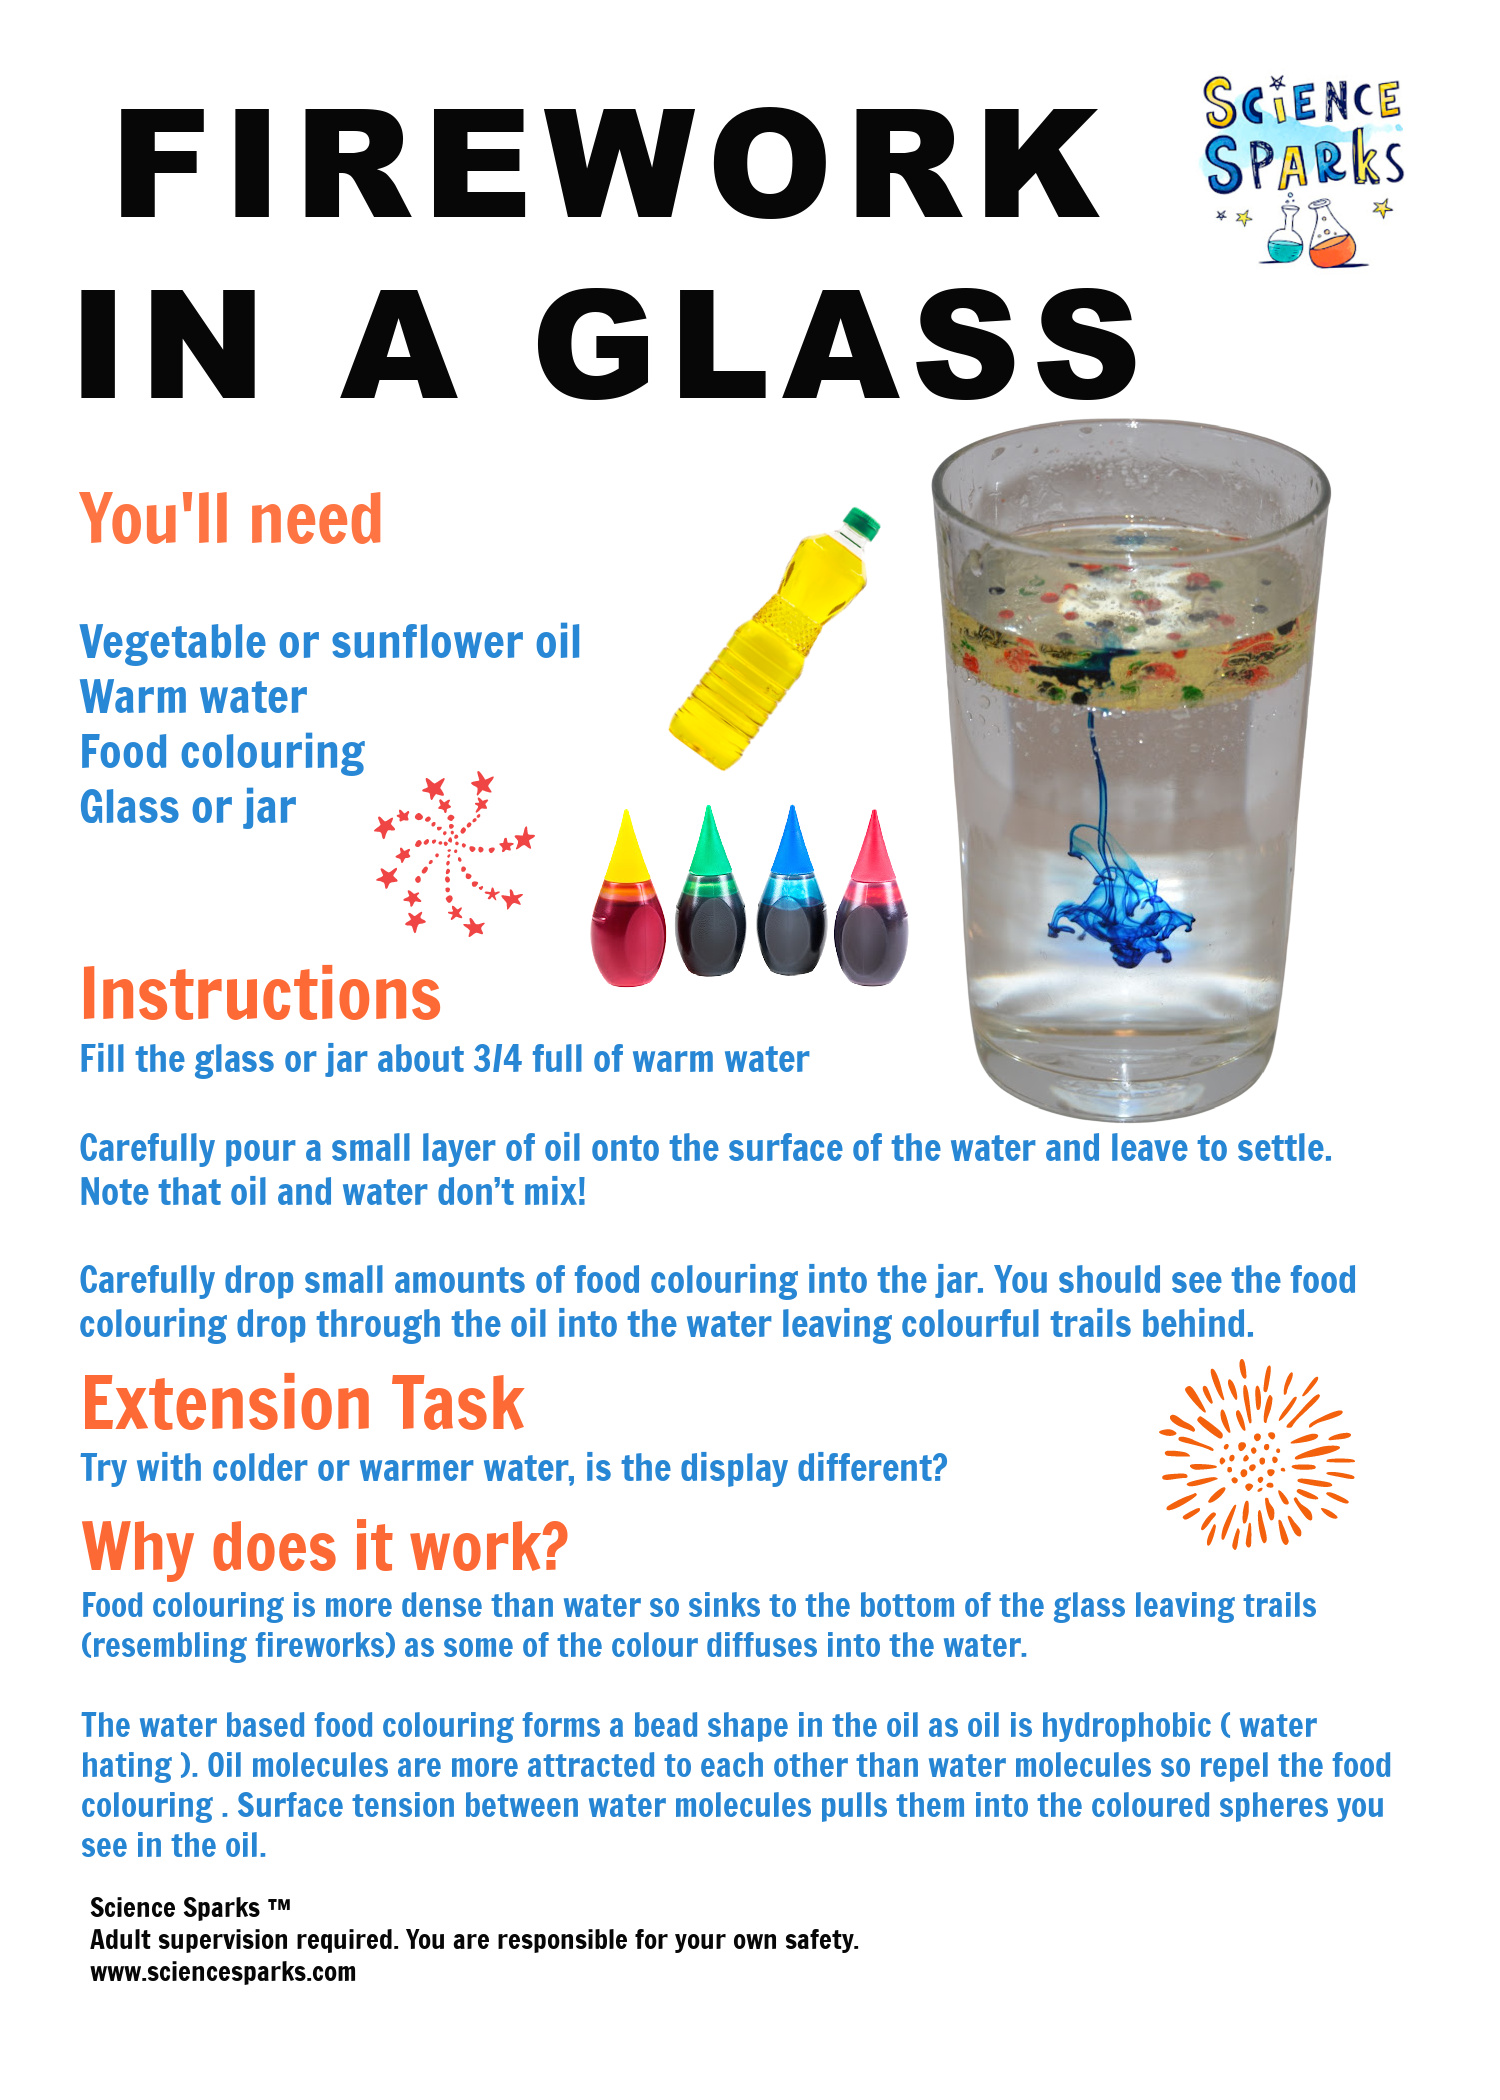 Instructions for a firework in a glass experiment